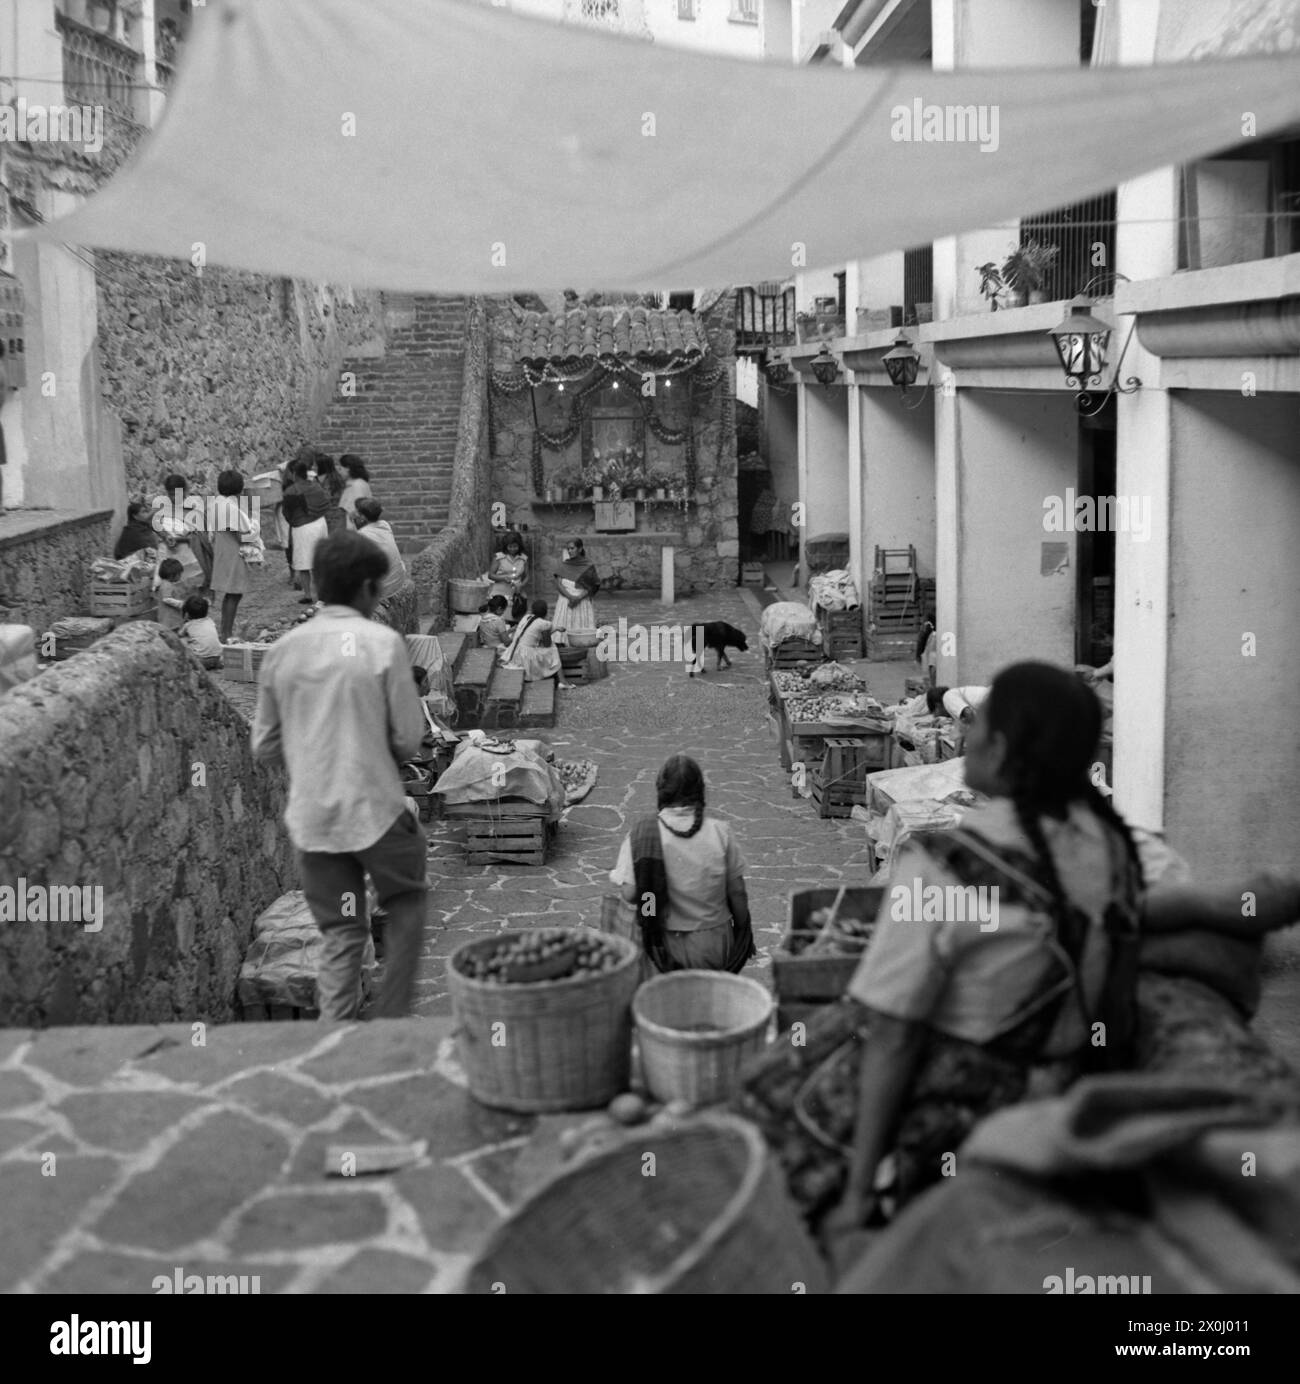 View into an inner courtyard in Taxco. There are many young people in the courtyard. Some are sitting on stone stairs. There are many wooden boxes standing around. At the other end of the courtyard there is a small shrine. Above the courtyard there are cloths stretched between the buildings. [automated translation] Stock Photo